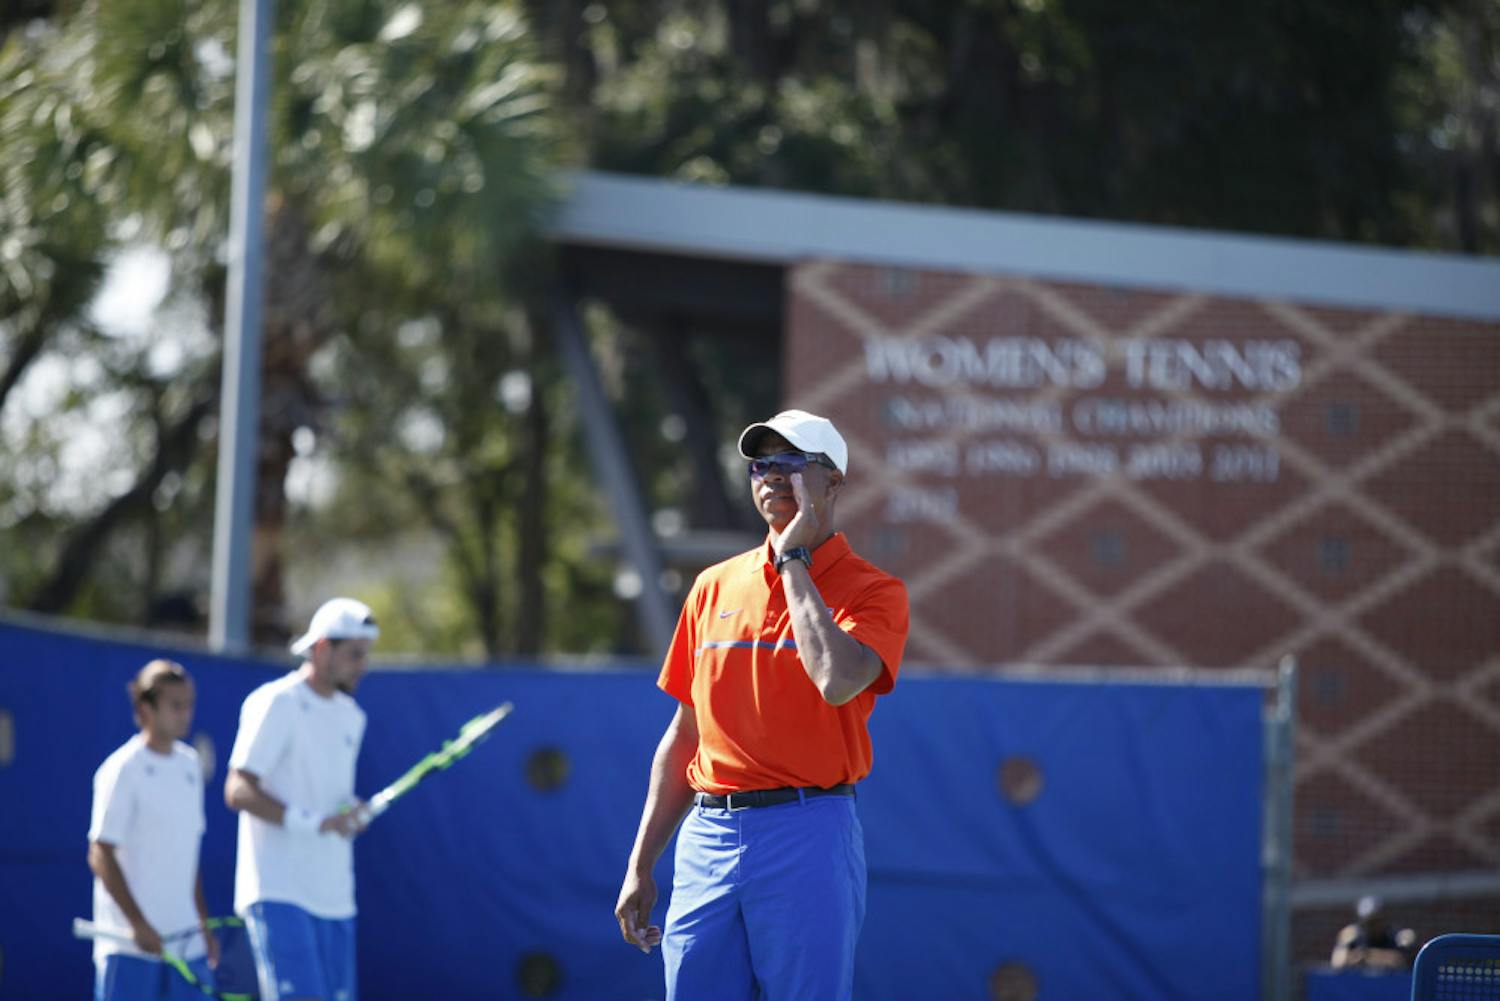 Florida men’s tennis coach Bryan Shelton has shifted his focus to UF’s home opener against UCF on Monday following freshman Duarte Vale’s exit from the City of Sunrise Pro Tennis Classic. “We know UCF is a really good team this year,” he said.